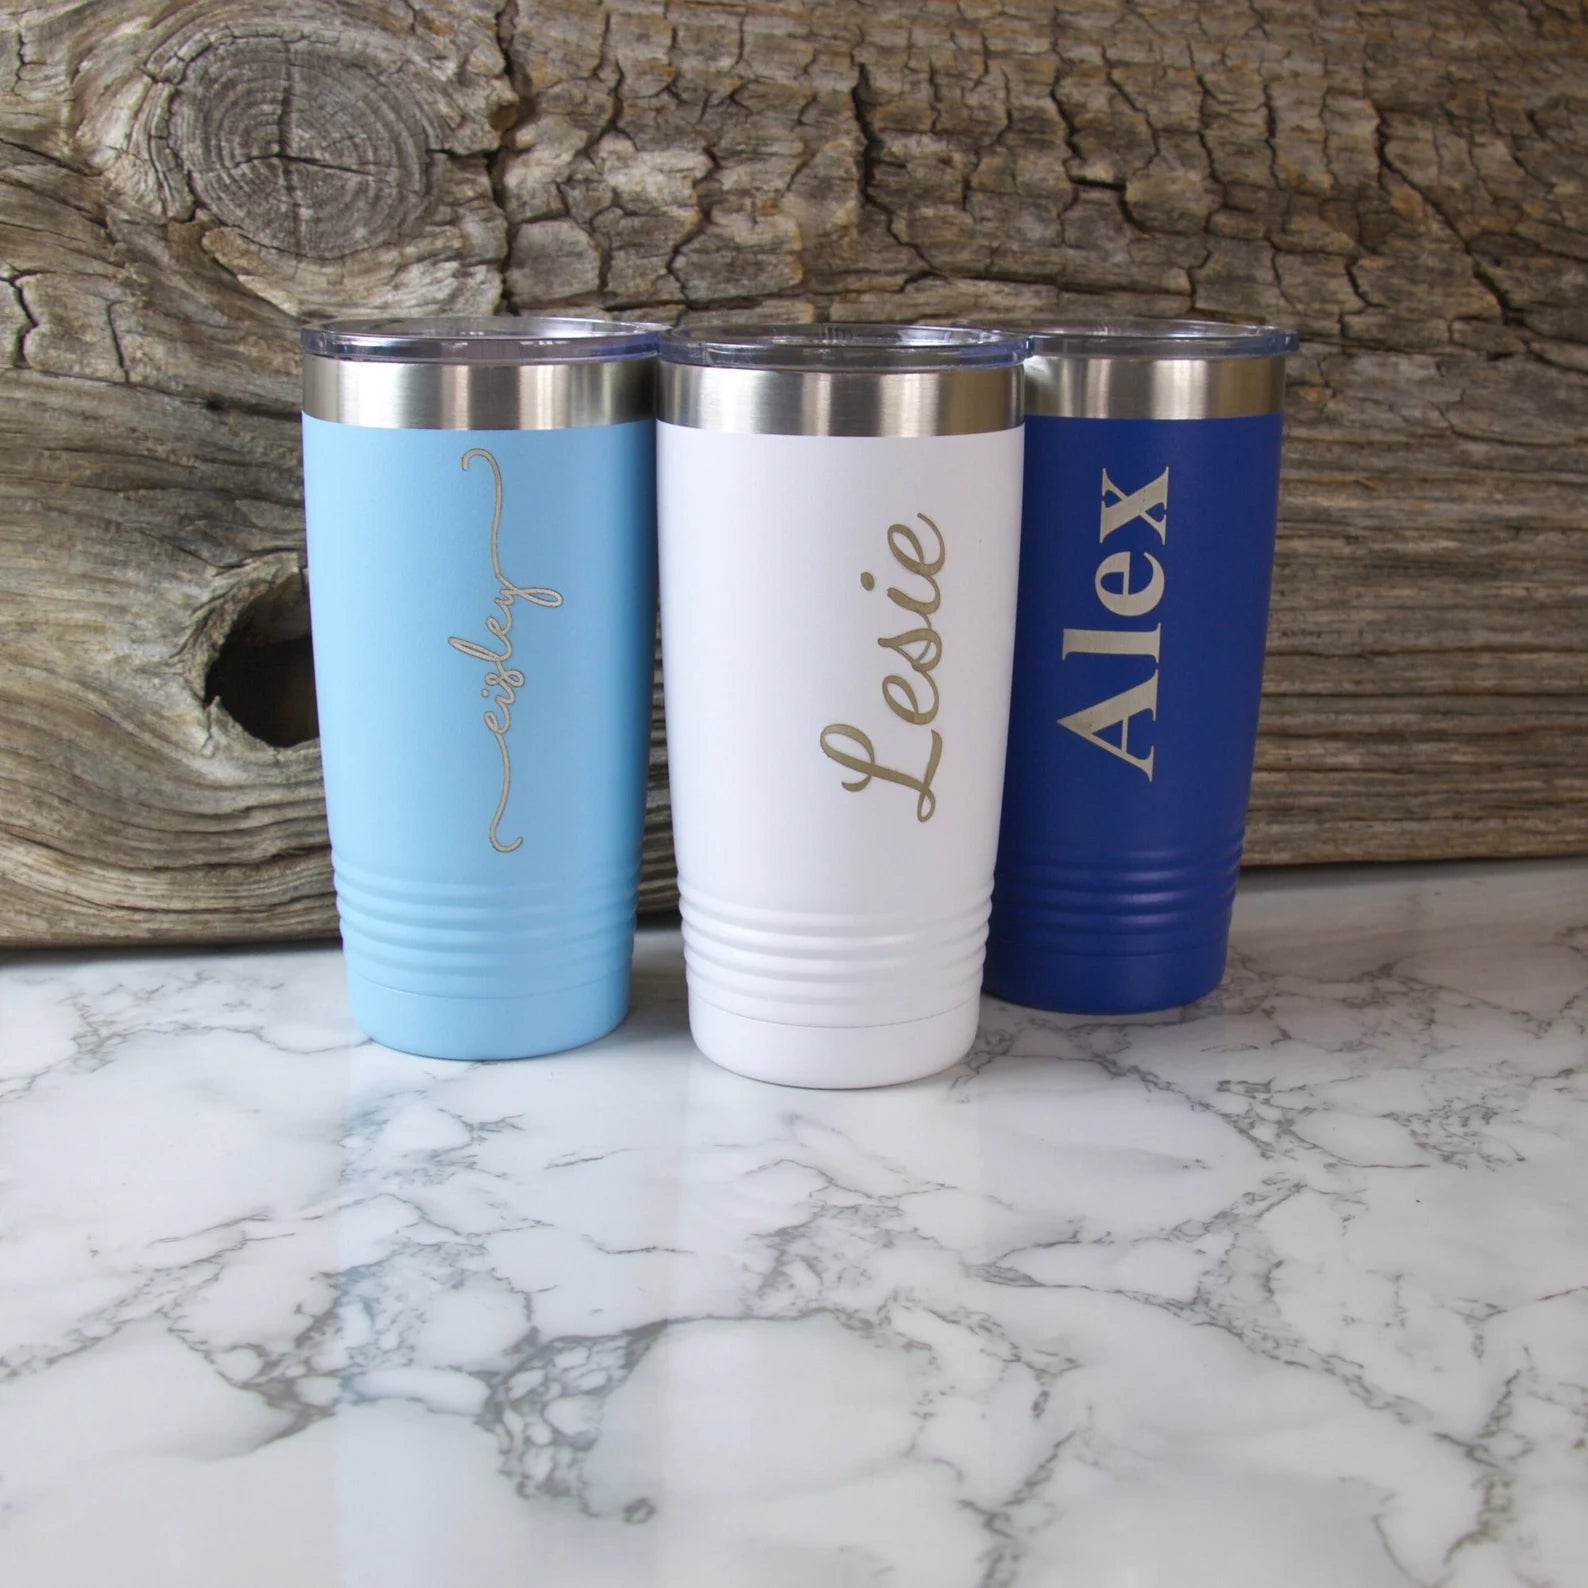 Custom Personalized and Engraved 15 oz Insulated Travel Tumbler Coffee Mug with Handle and Lid - Customized to Go Cup (Carolina Blue)